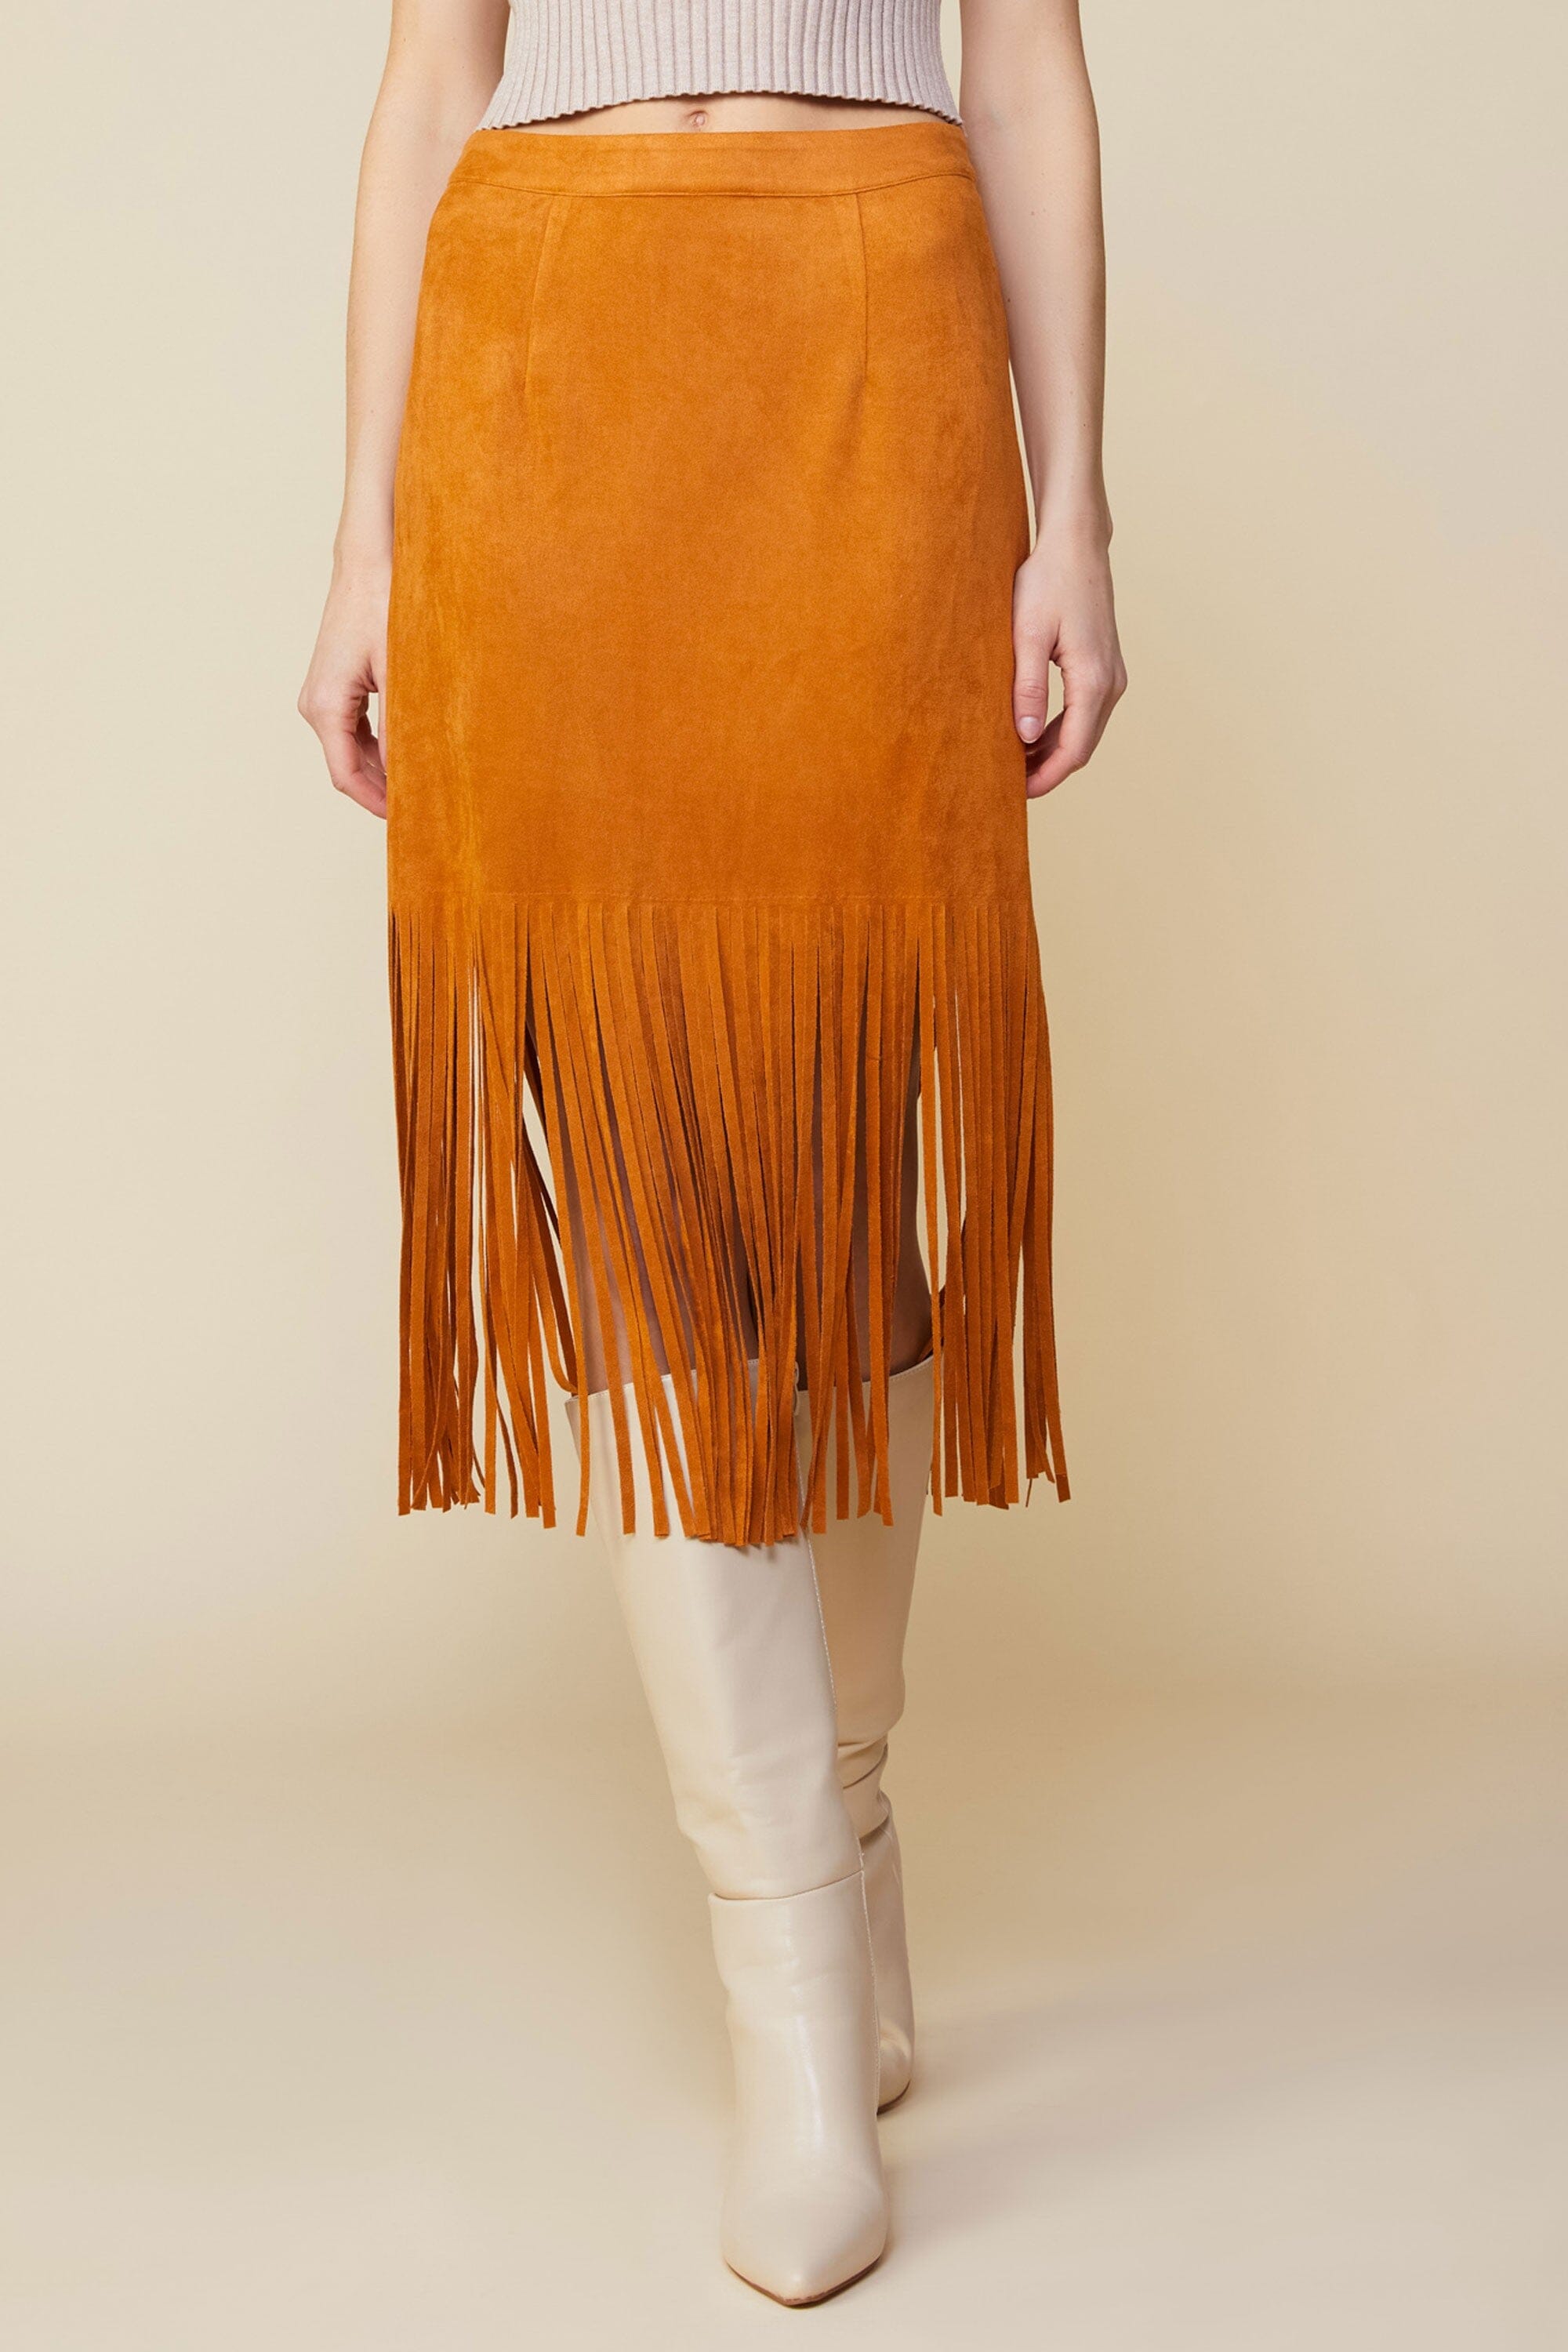 FAUX SUEDE FRINGE MIDI SKIRT skies are blue 